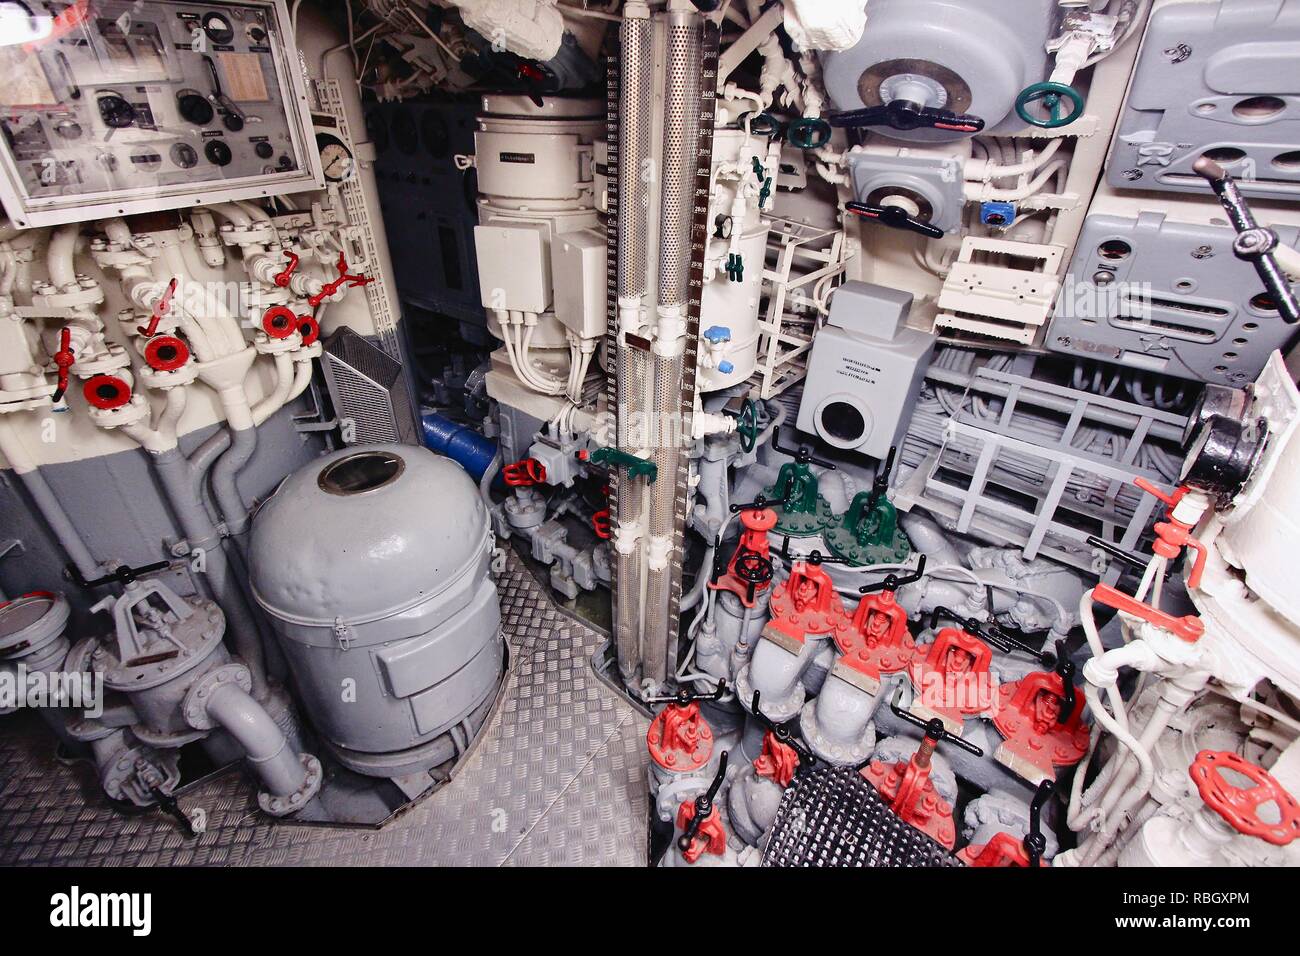 LABOE, GERMANY - AUGUST 30, 2014: Interior of German submarine U-995 (museum ship) in Laboe. It is the only surviving Type VII submarine in the world. Stock Photo